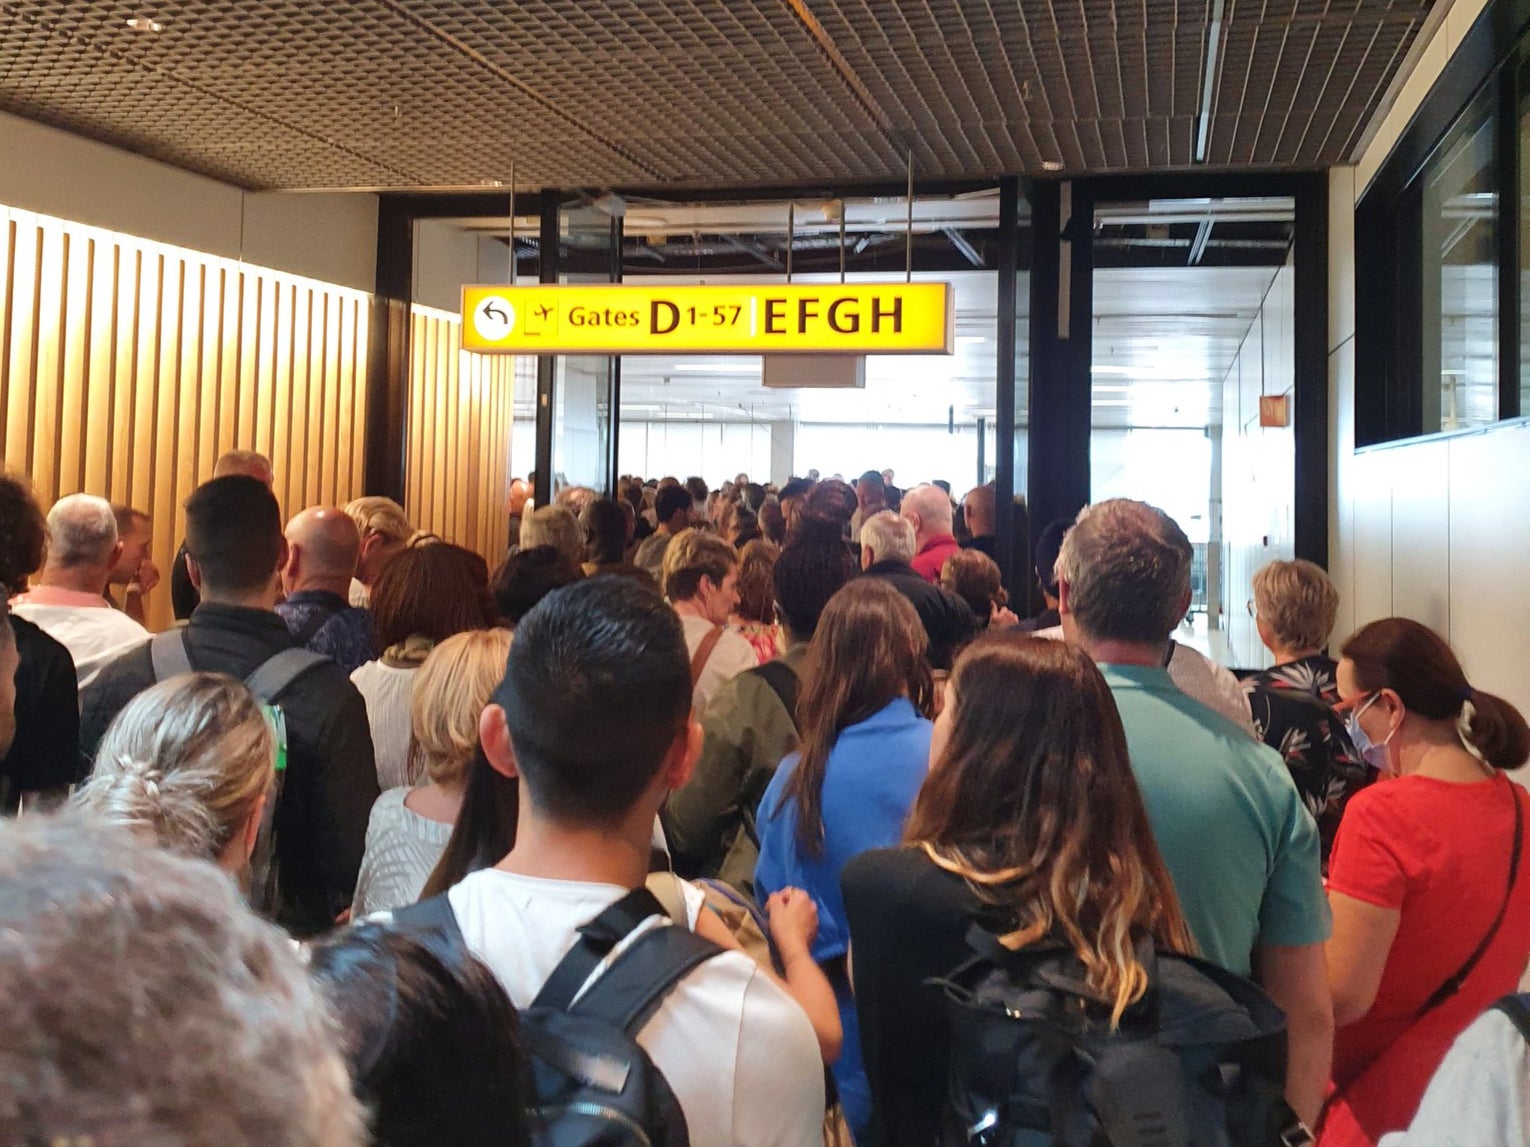 Queues at Amsterdam Schiphol on Monday